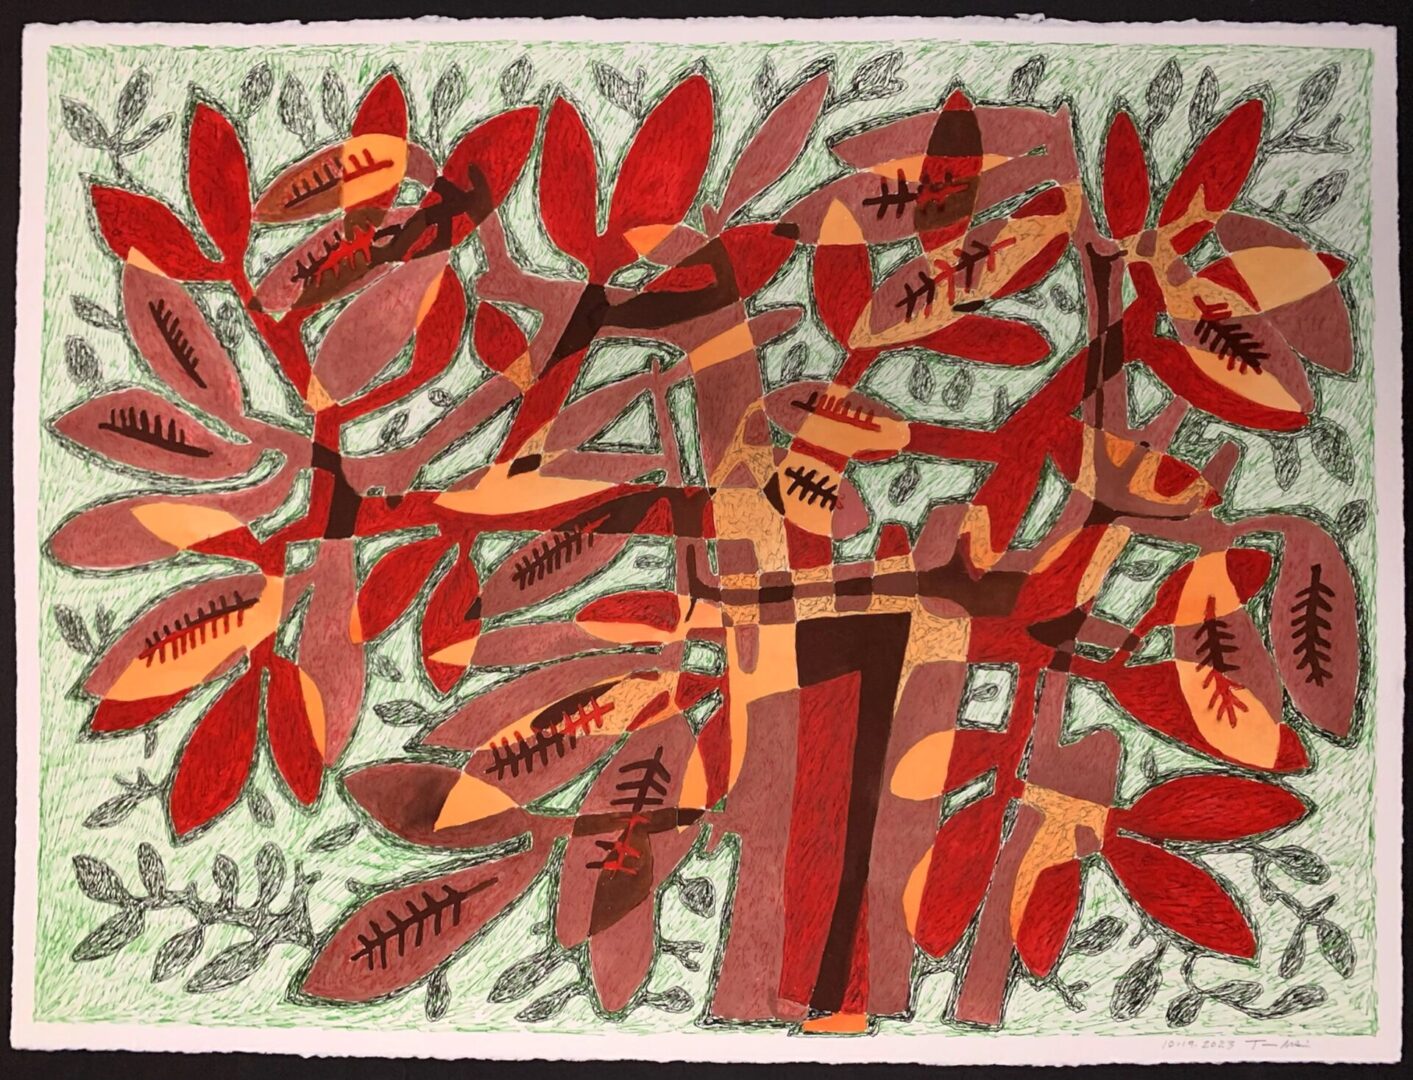 A painting of leaves and a vase on the ground.